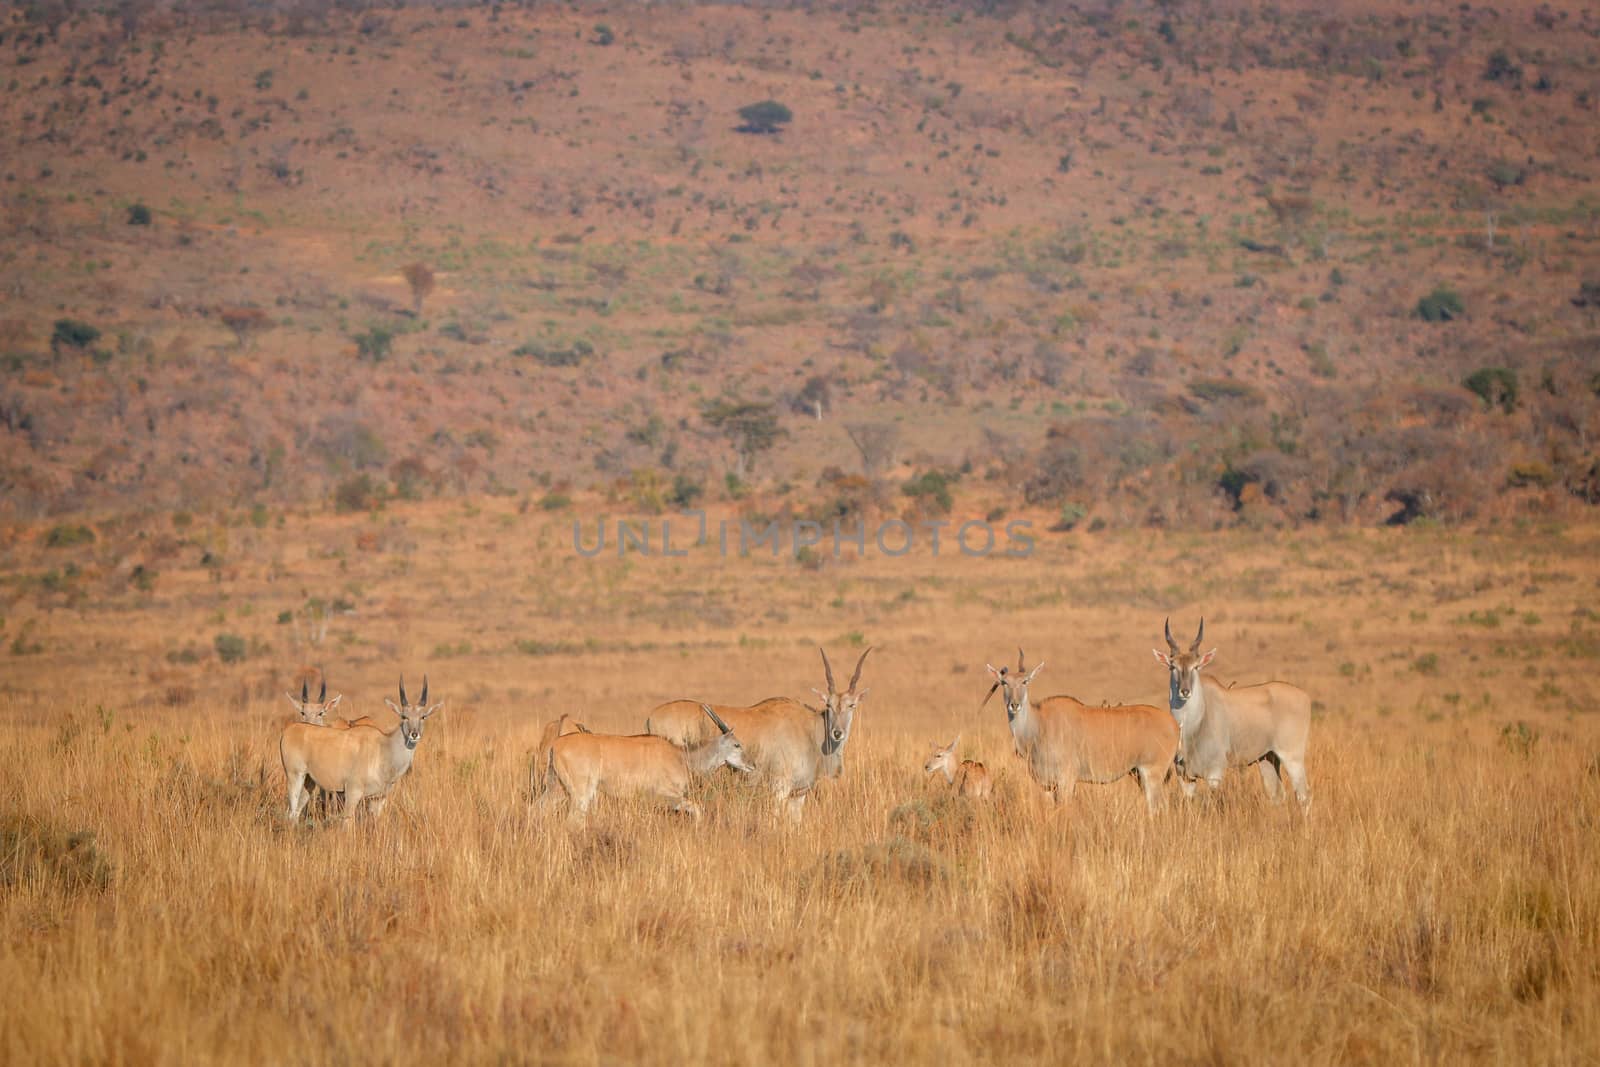 Herd of Eland standing in the high grass in the Welgevonden game reserve, South Africa.